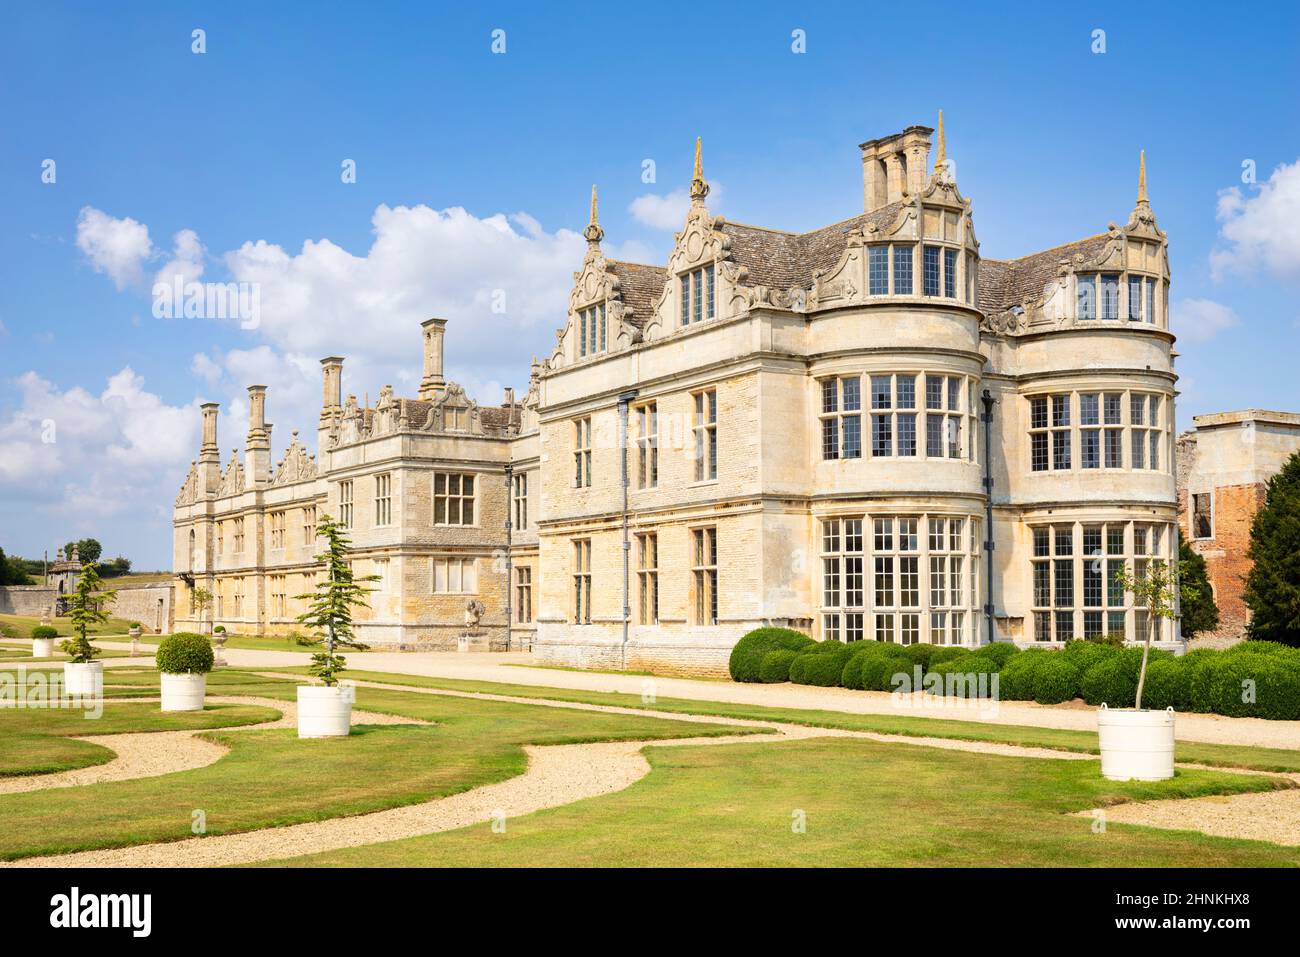 Kirby Hall a ruined 17th century Elizabethan stately home or country house near Gretton near Corby Northamptonshire England UK GB Europe Stock Photo